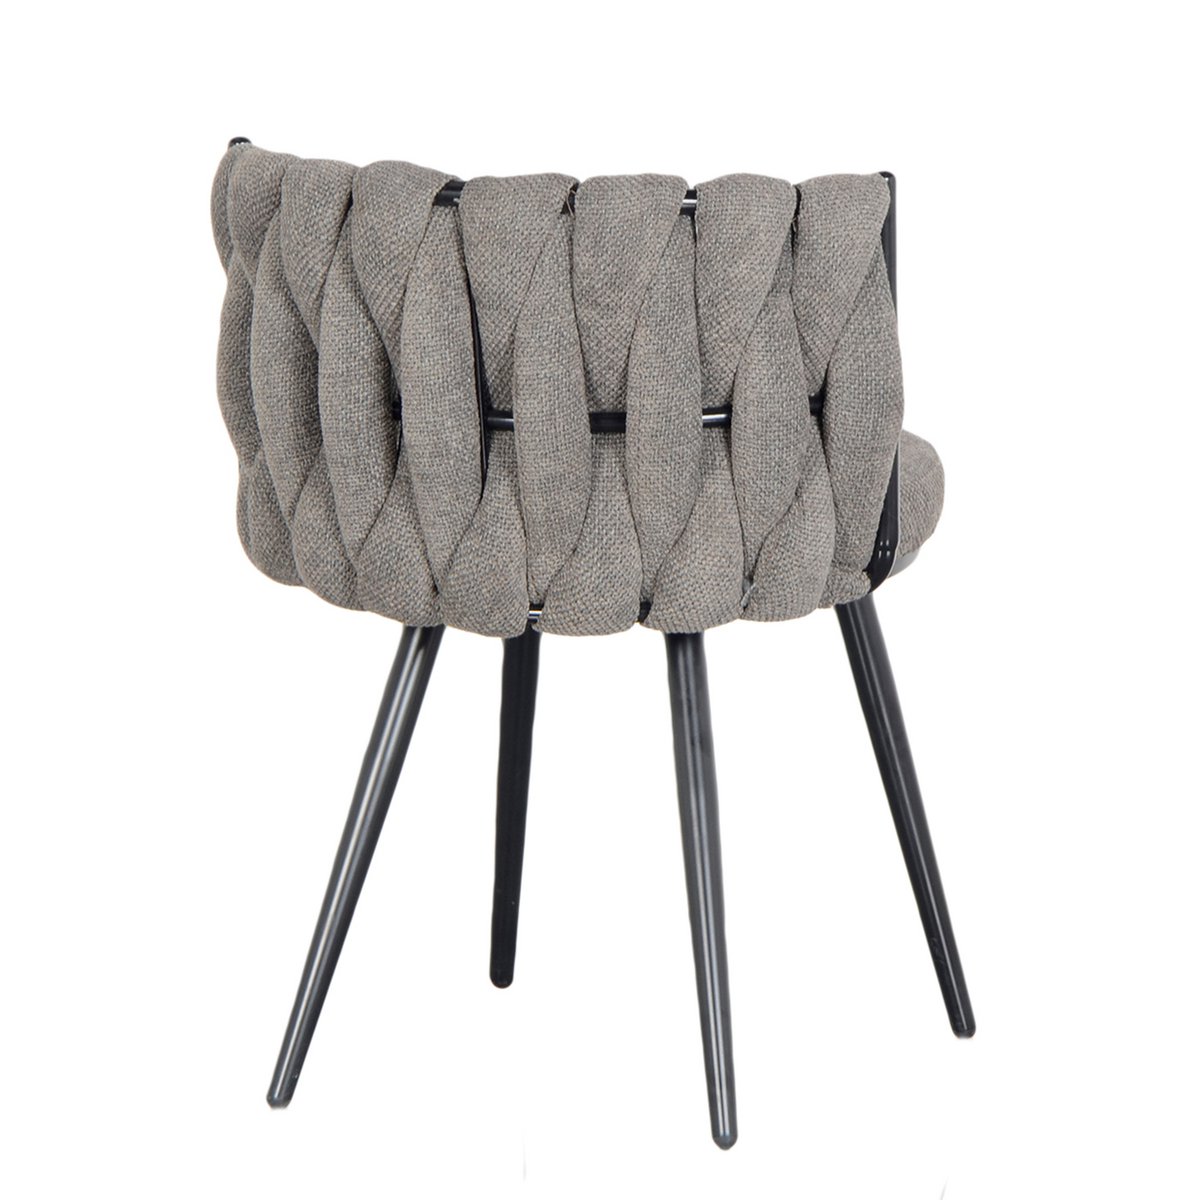 Moon chair taupe (Set of 2)